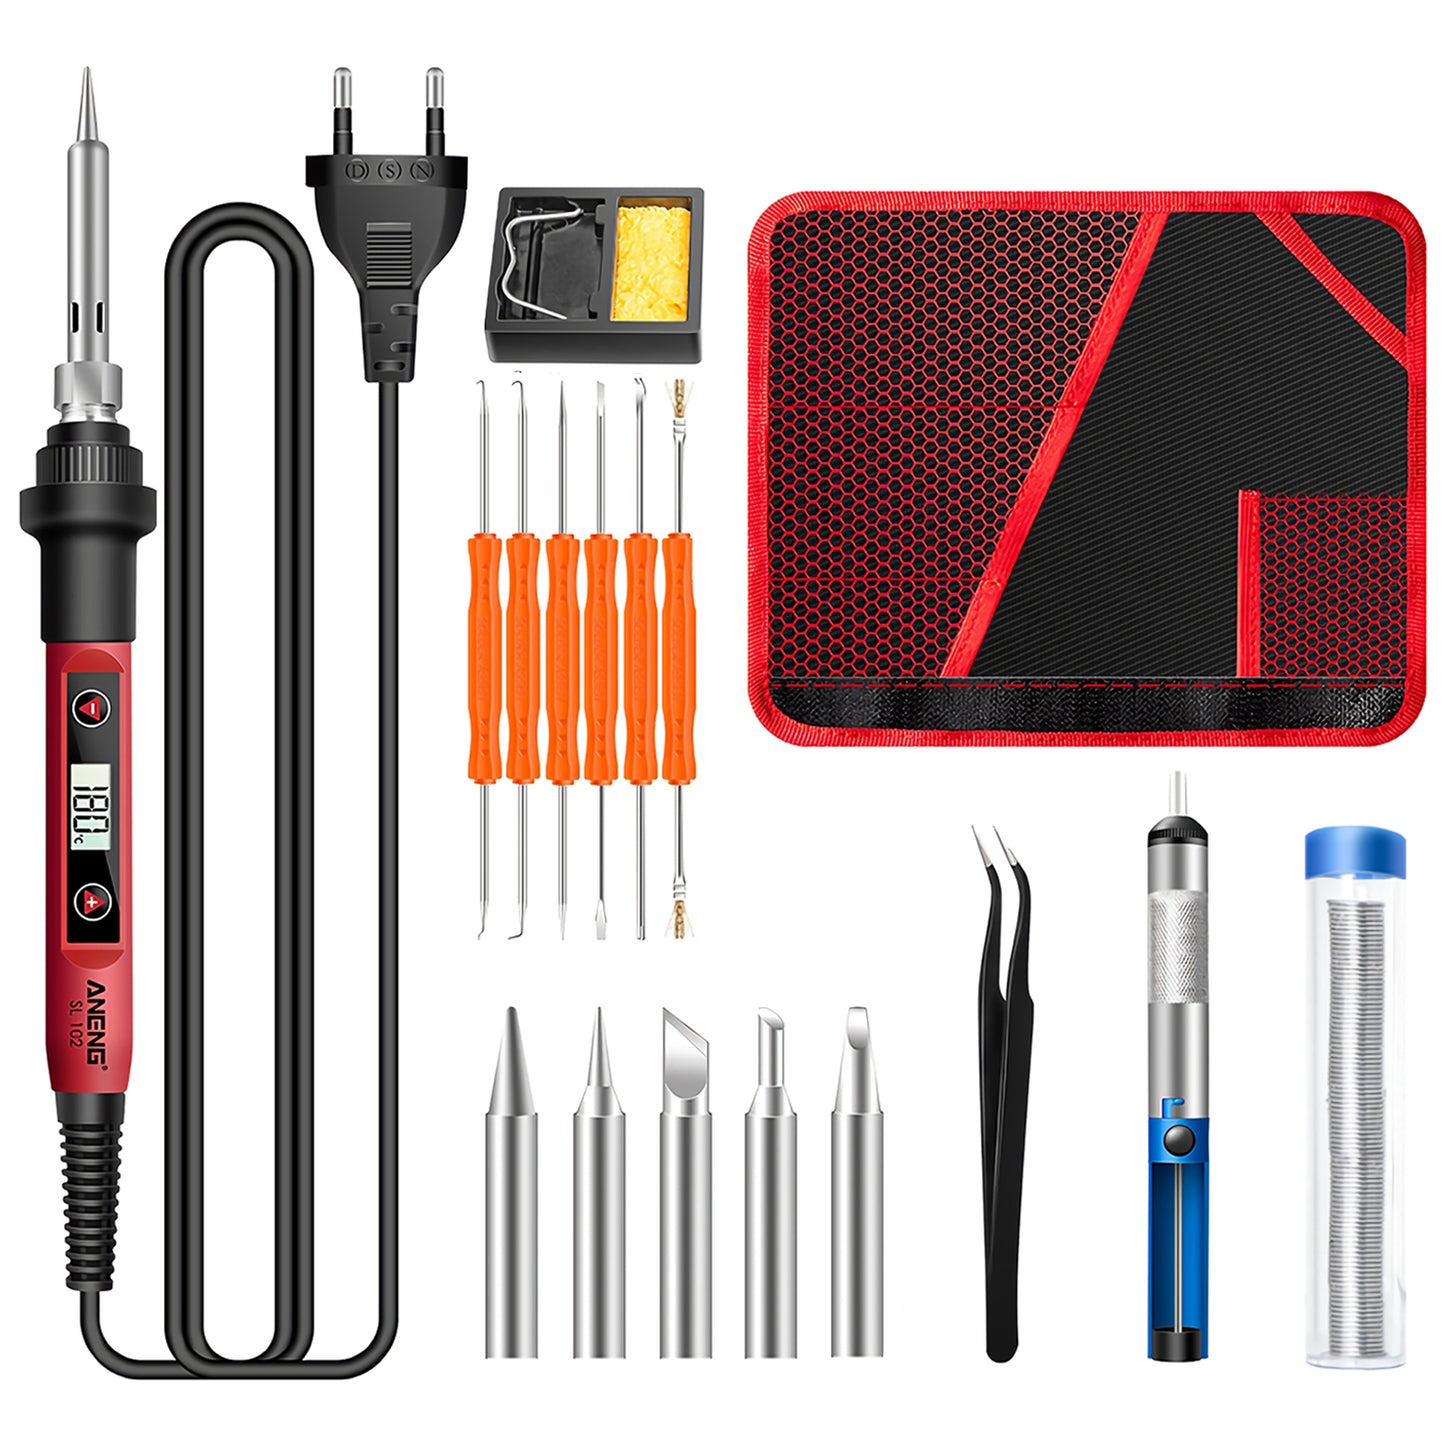 Serplex  Soldering Iron Kit Set 60 Watt 220V Soldering Machine Temperature Adjustable 17Pcs Soldering Iron Bit Set with LCD Display Electric Soldering Iron with Stand Holder Rolled Up Storage 5 Tips